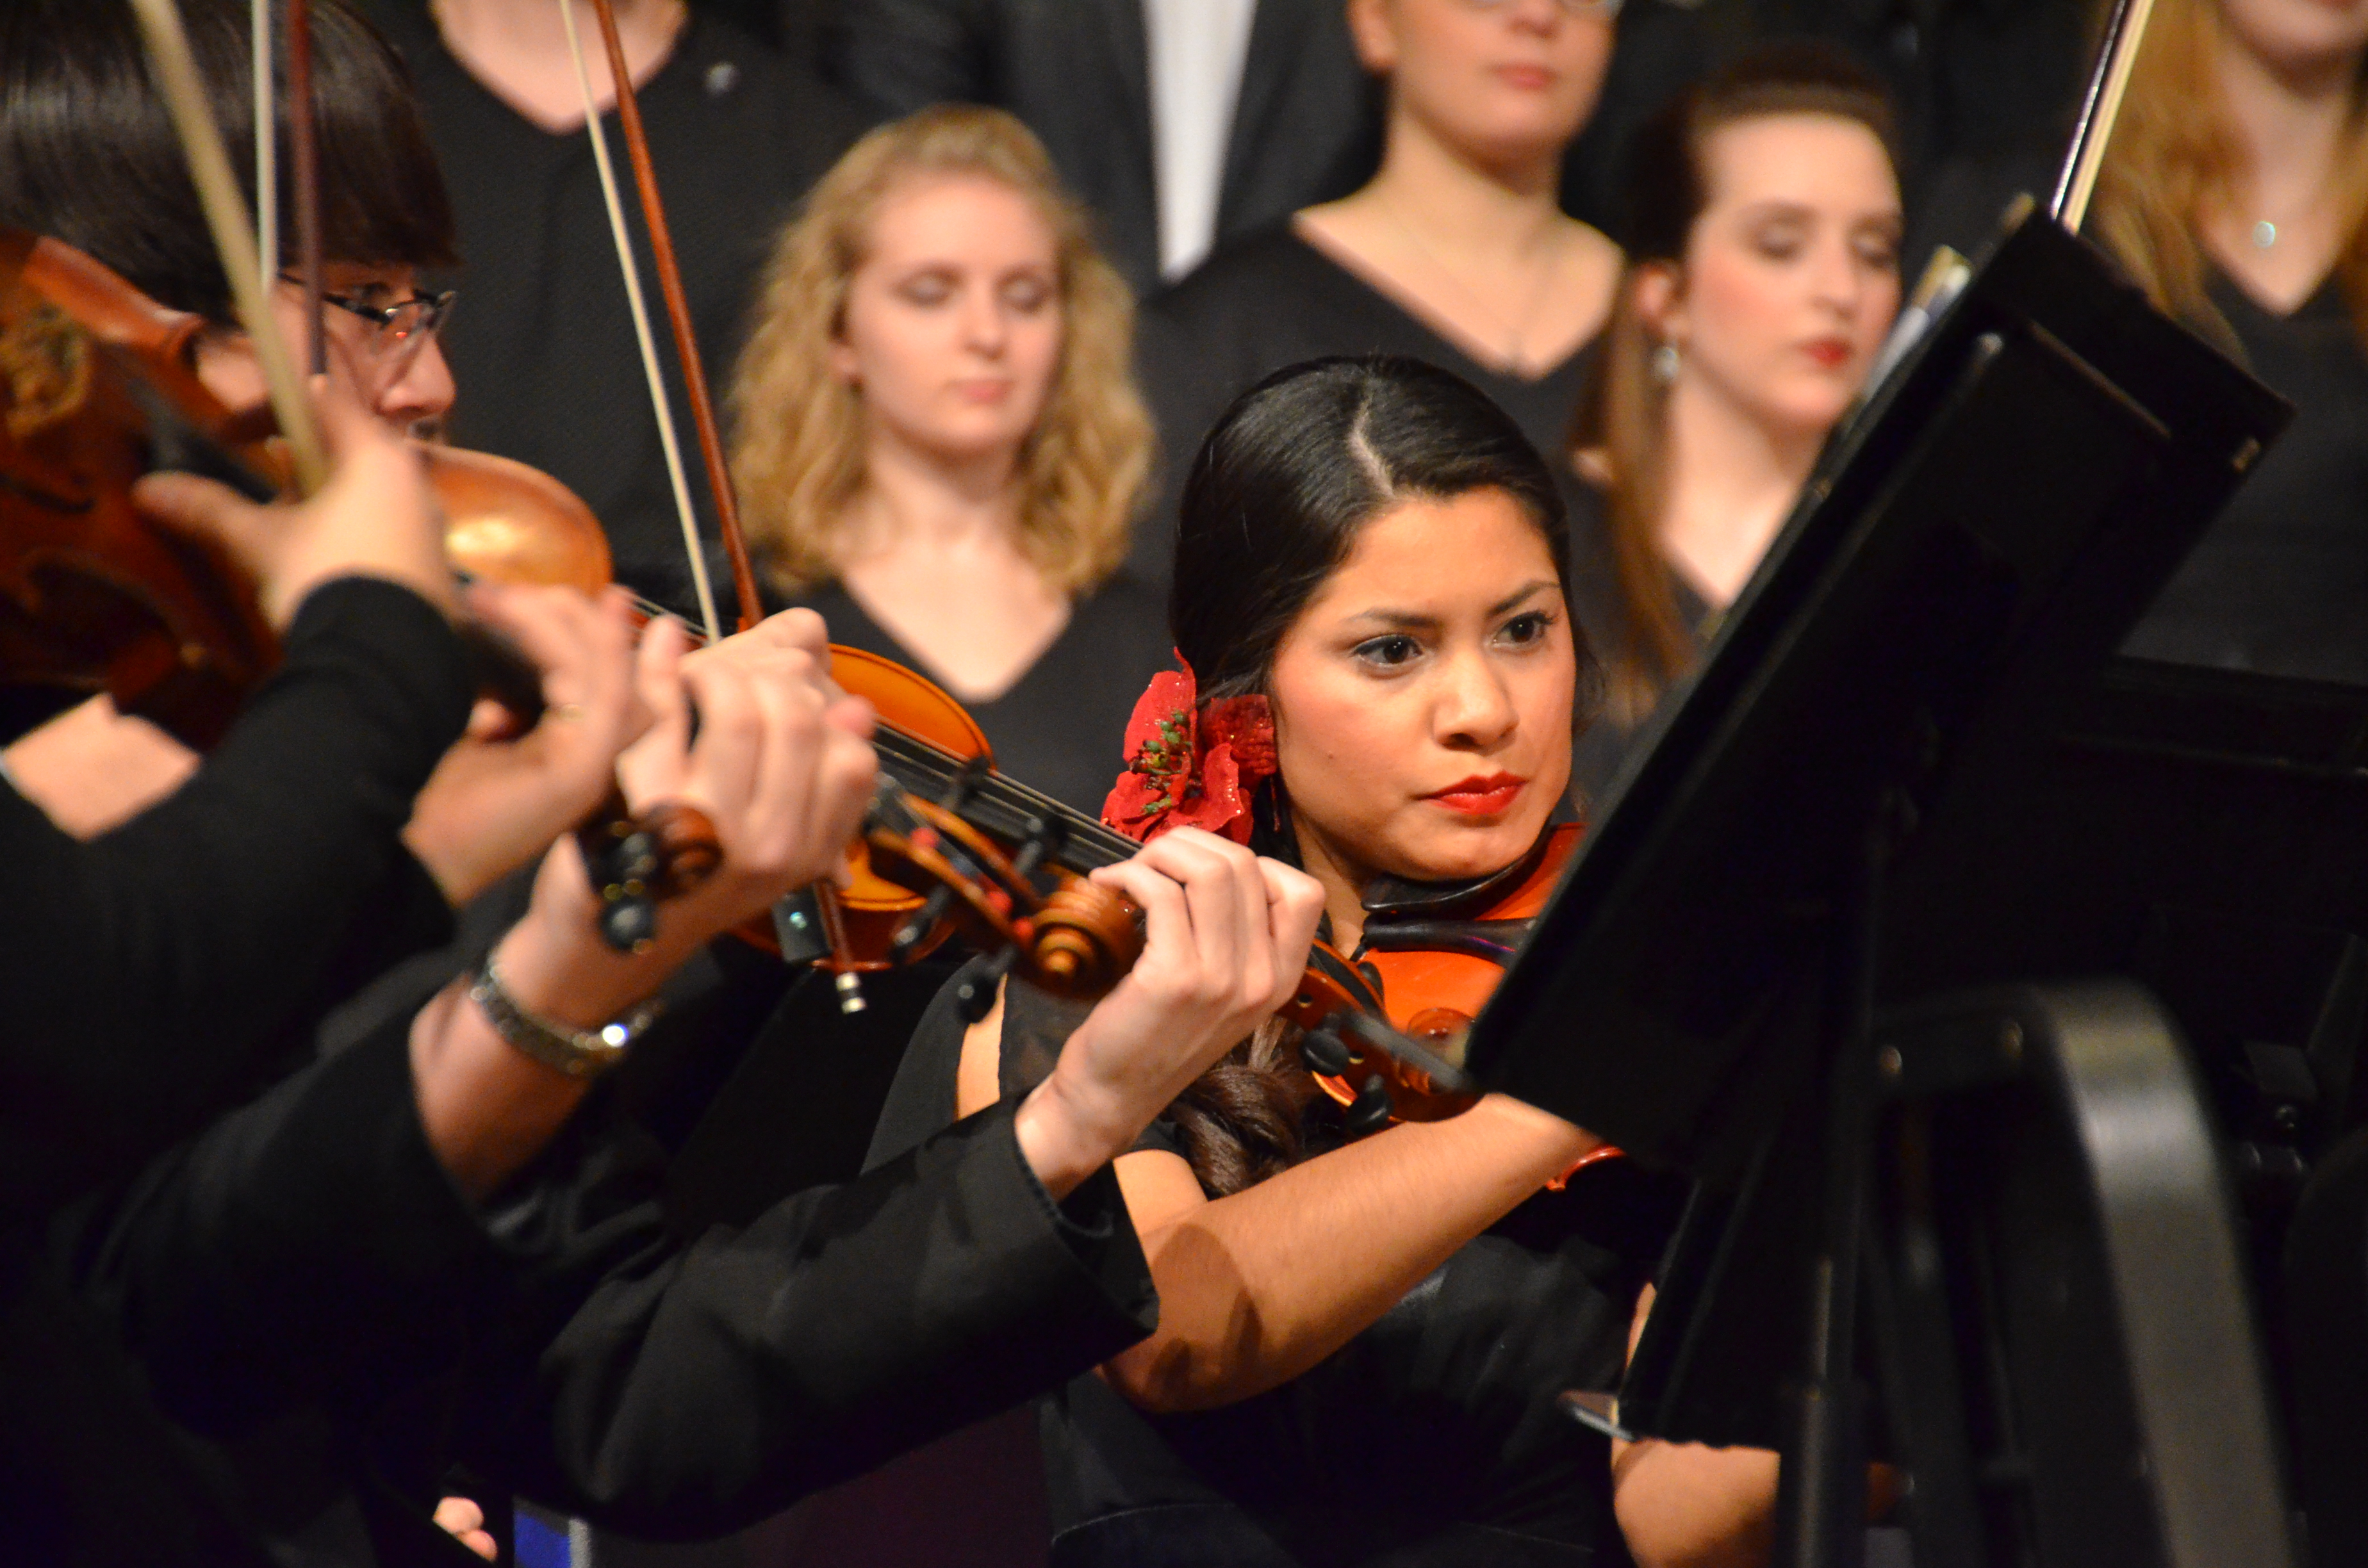 Evangel’s 33rd Annual Christmas Concert to benefit Salvation Army on